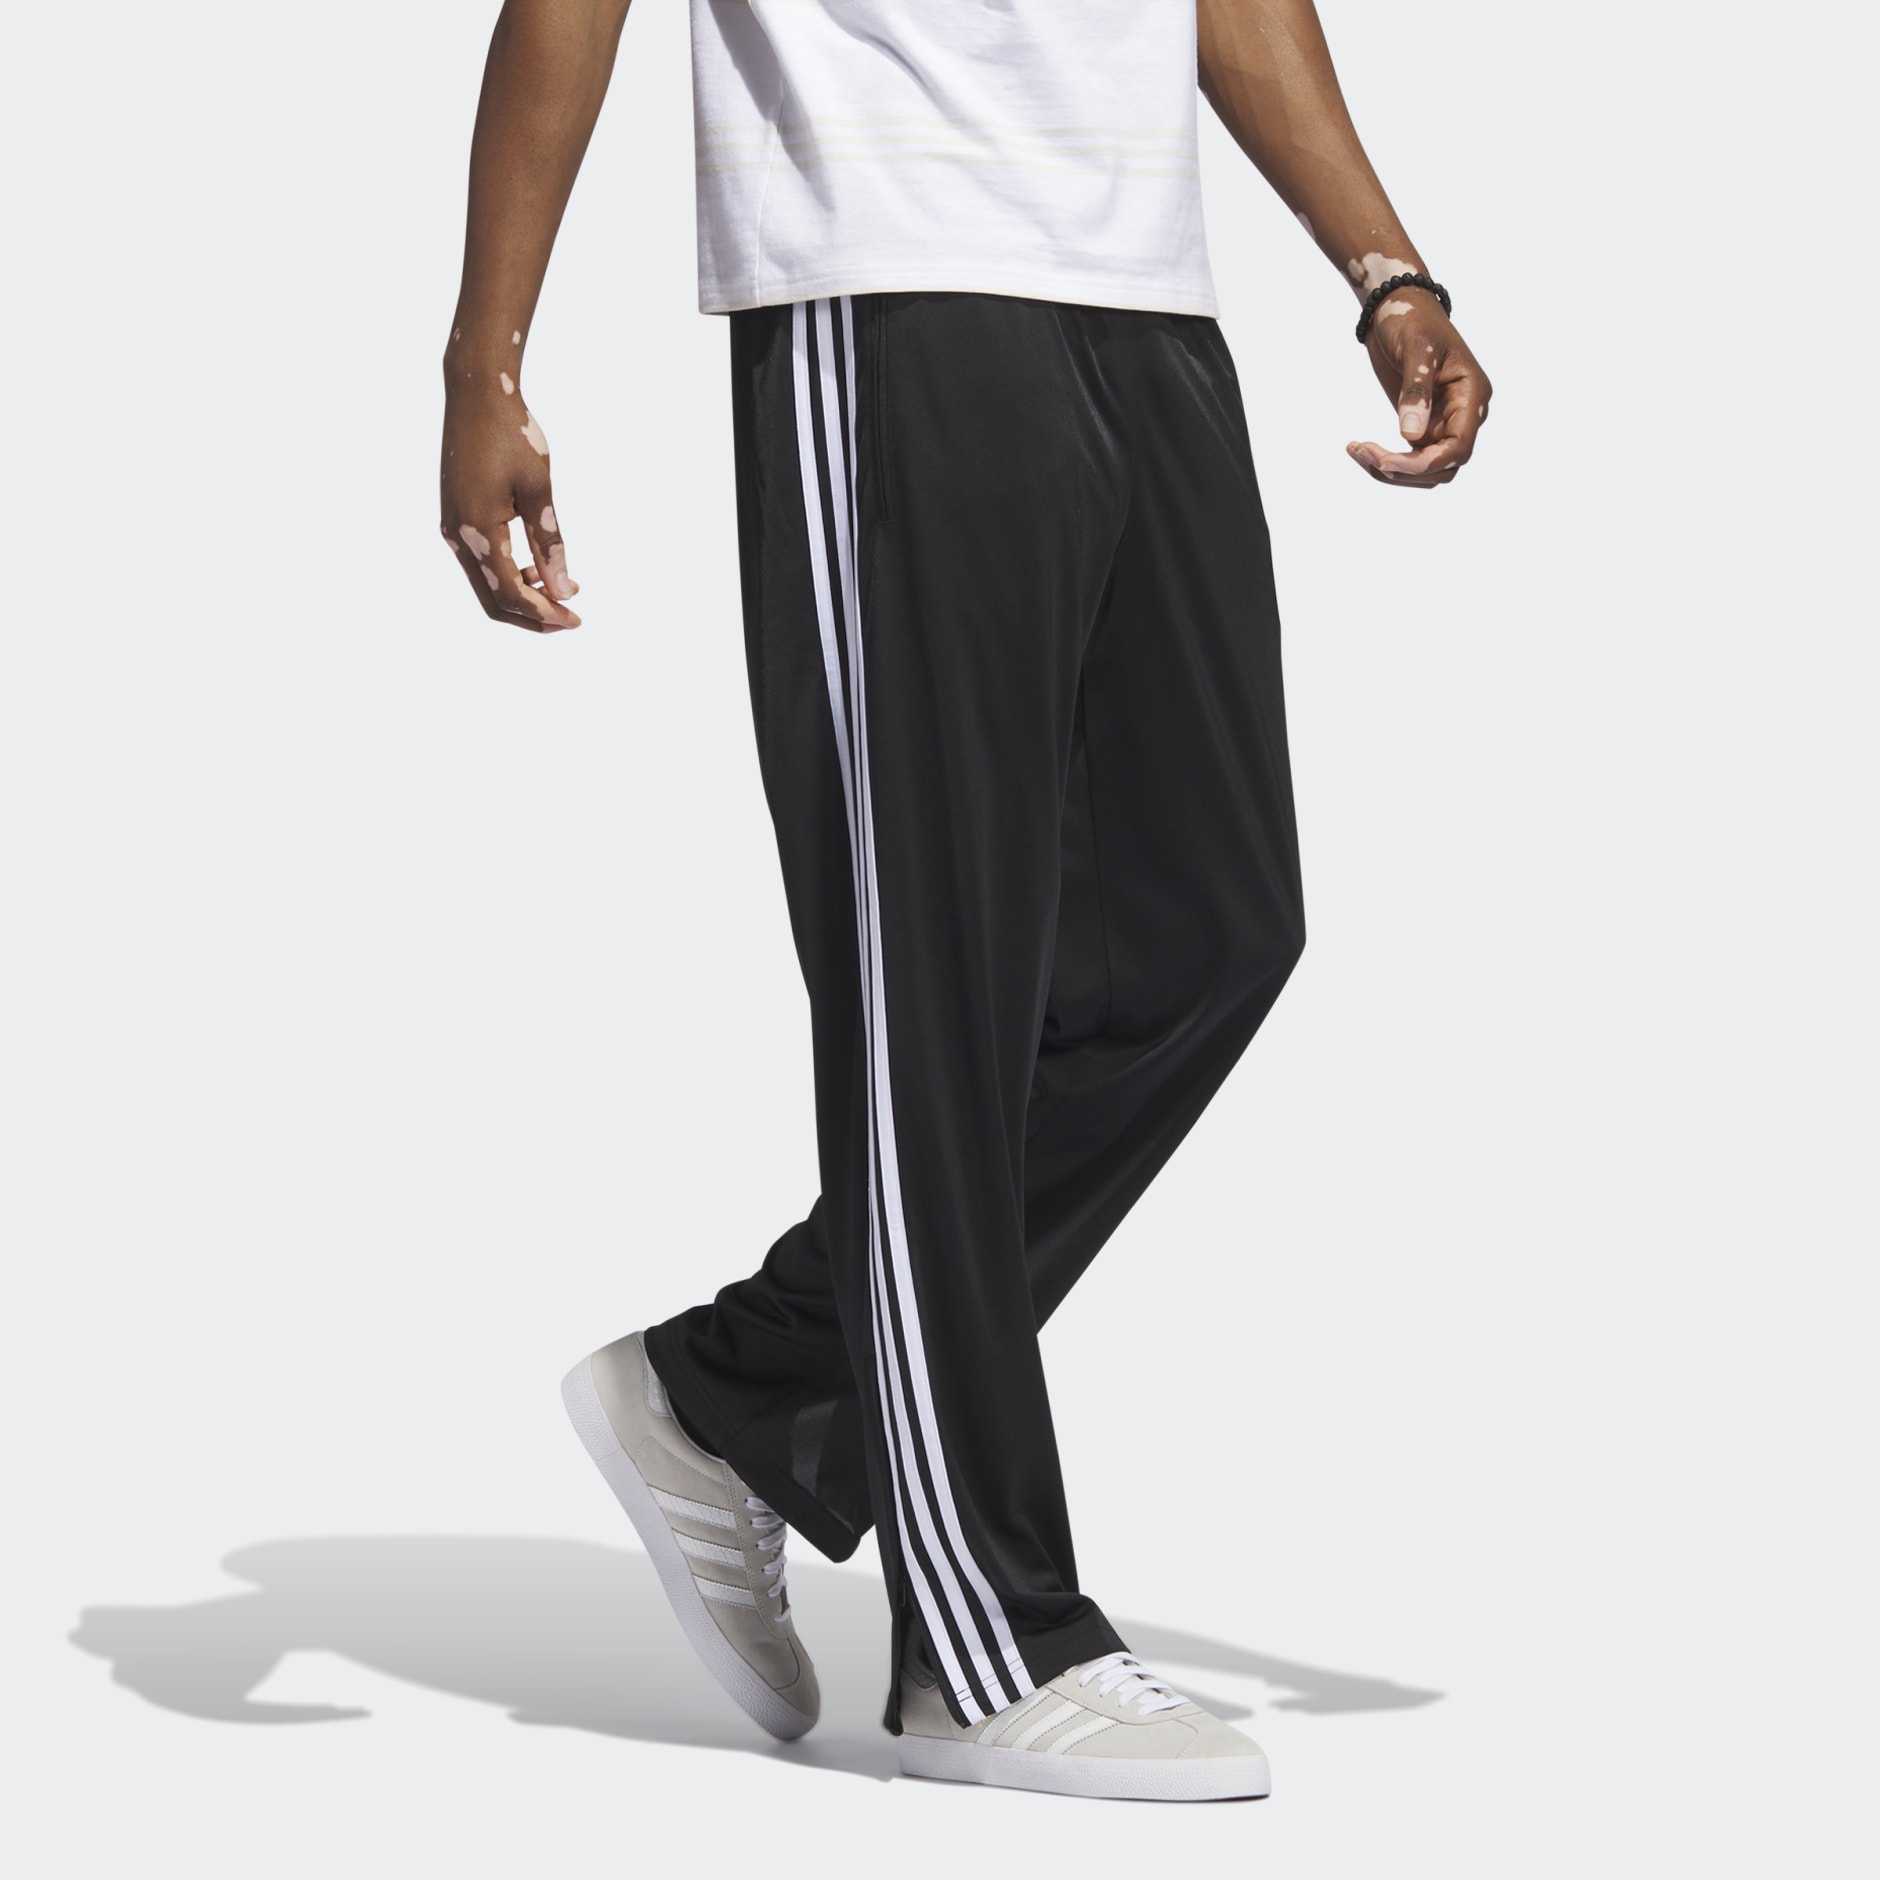 adidas + UO Fitted Track Pant | Adidas pants outfit, Adidas pants, Adidas  track pants